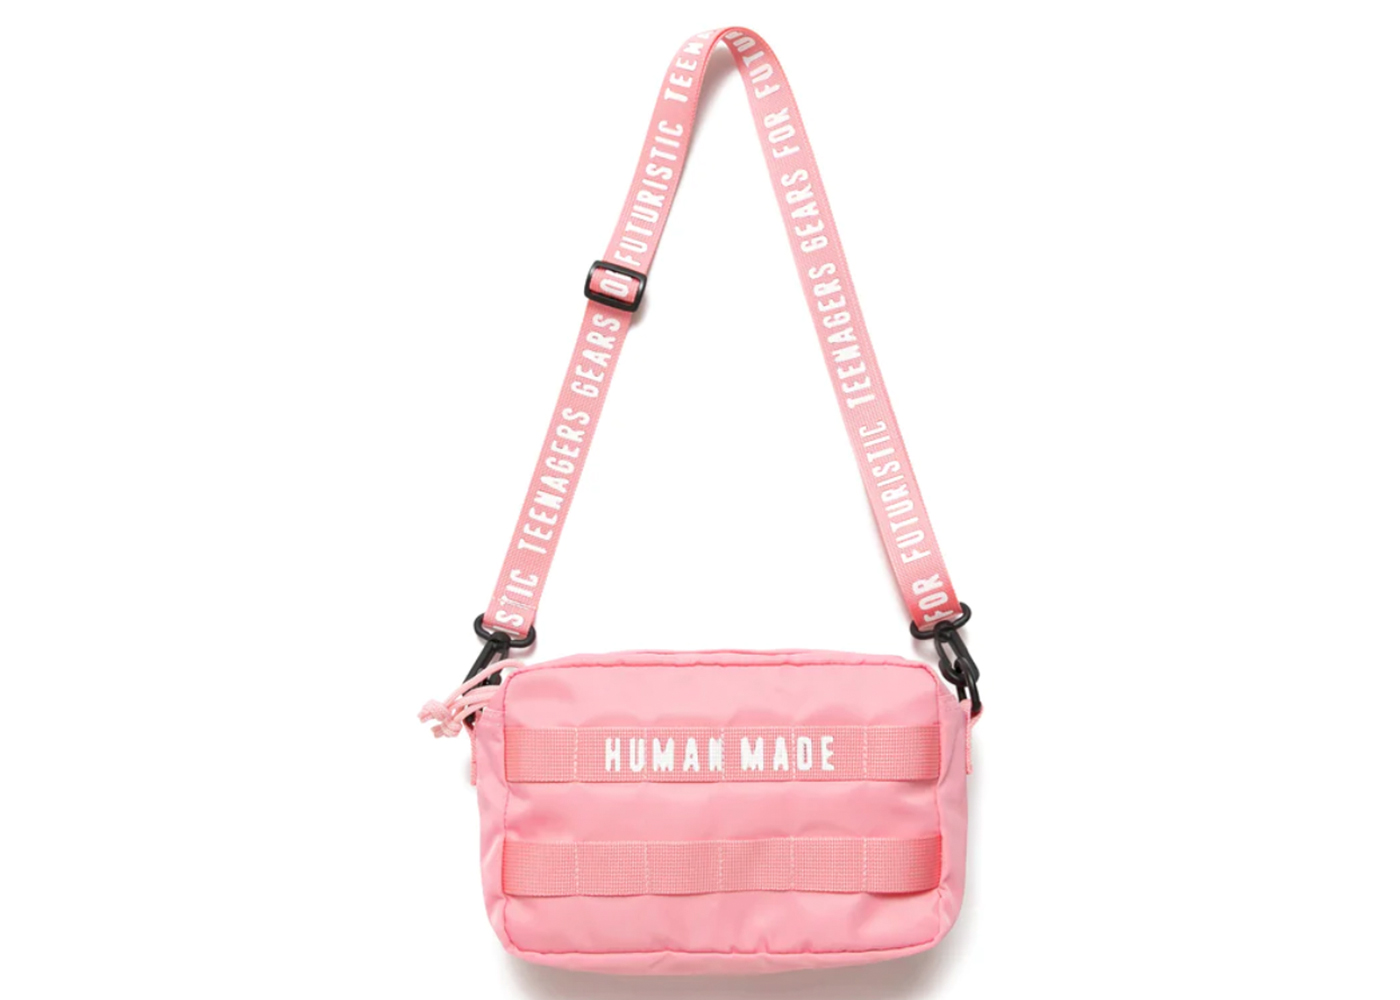 Human Made Military #1 Pouch Pink - FW22 - JPさんタク バッグ